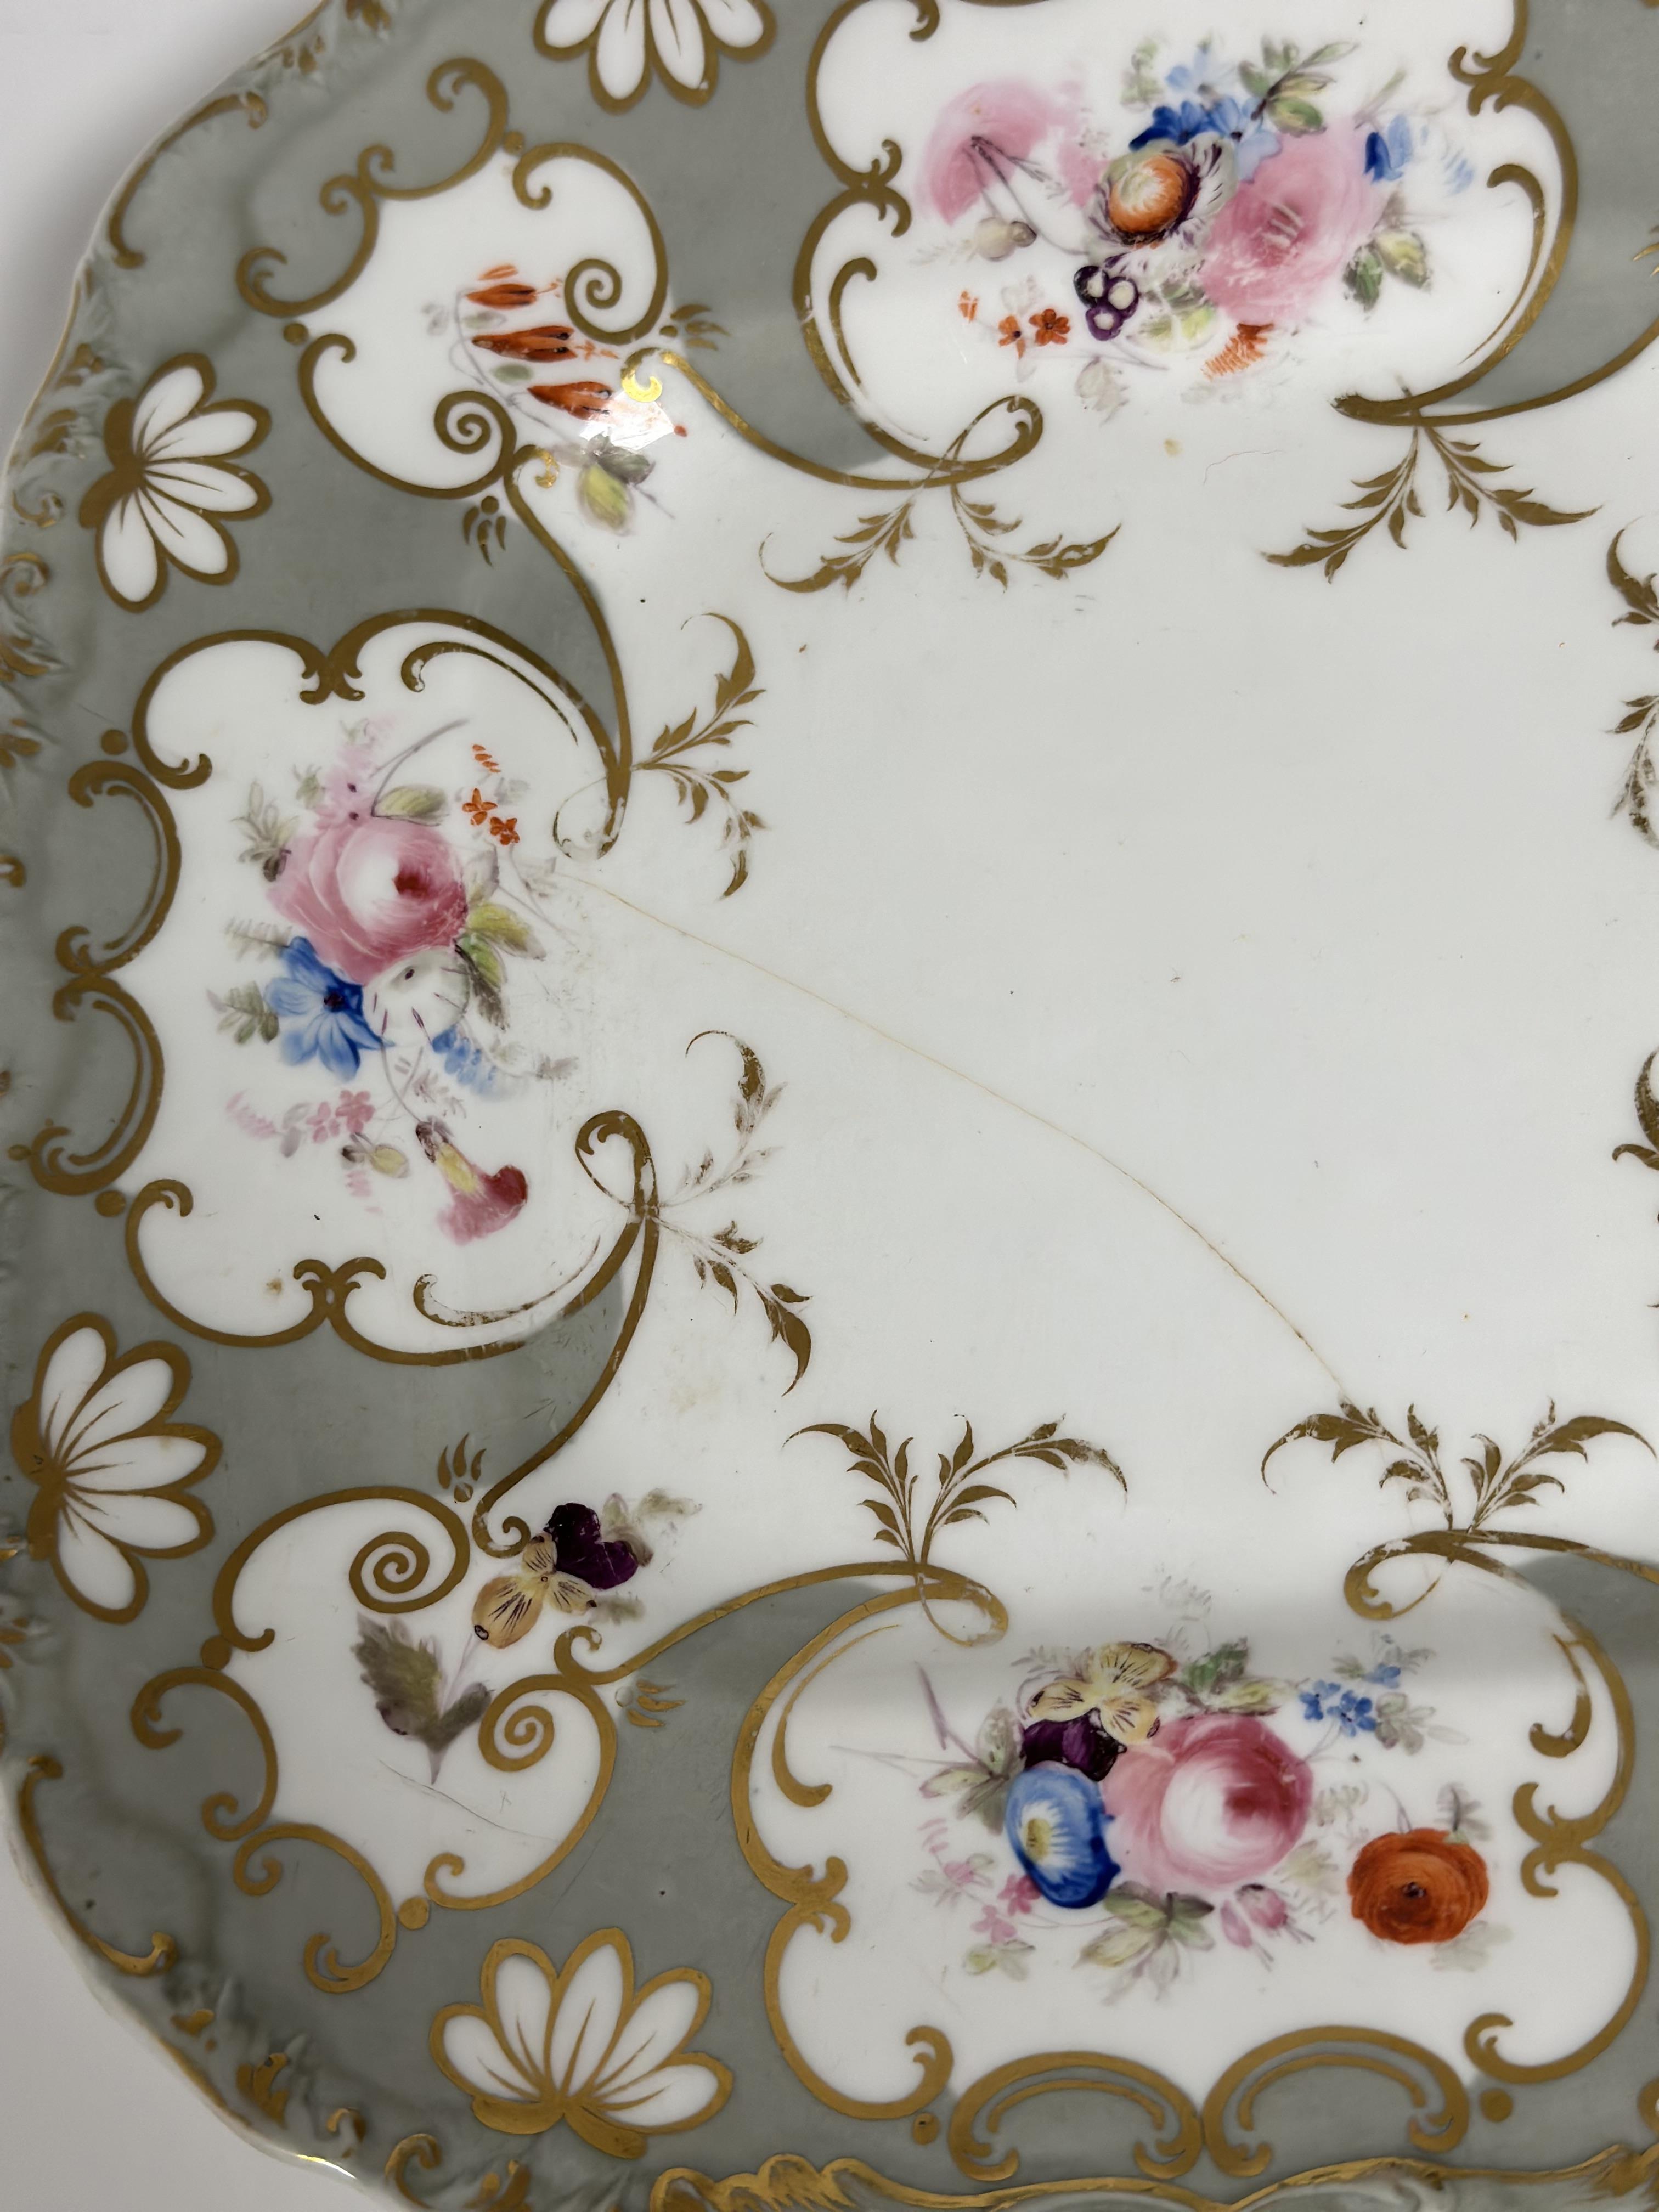 A 19th century Derby part tea service decorated with gold gilding and silver and floral enameling, - Image 4 of 4